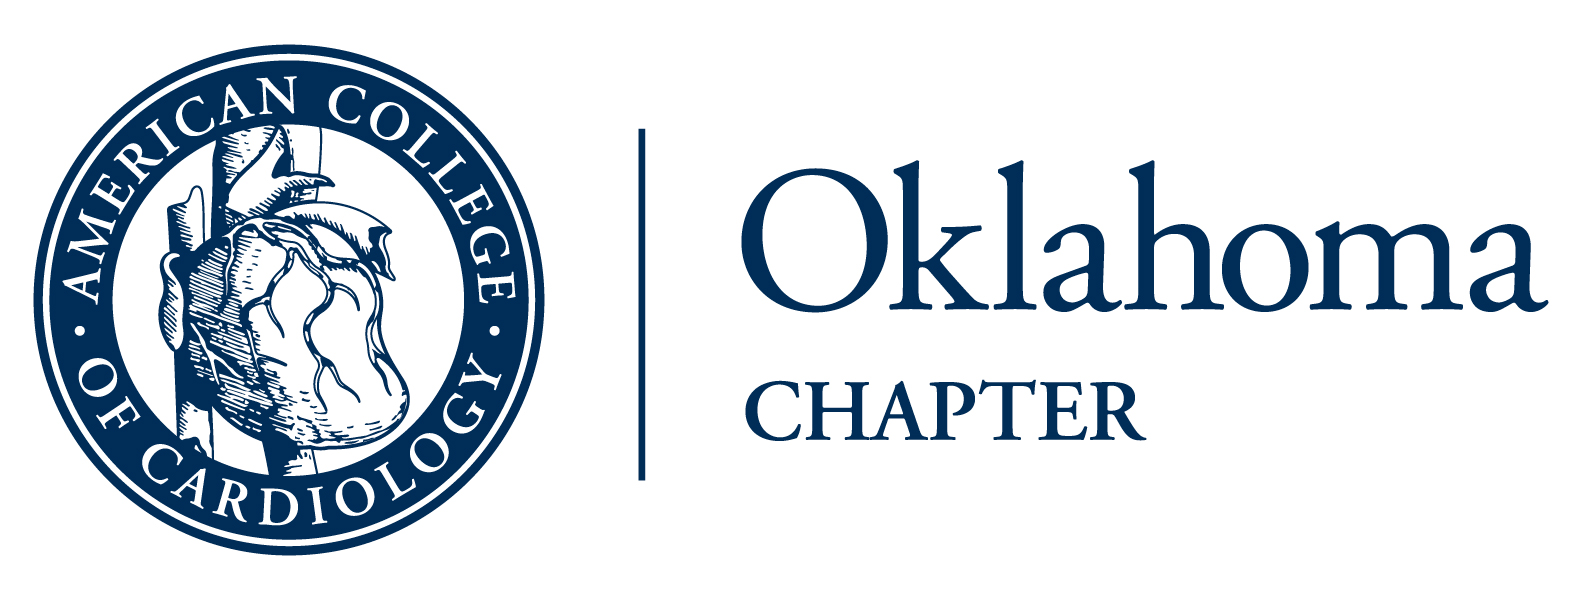 American College of Cardiology (ACC) Oklahoma Chapter 2019 Annual Scientific Meeting Banner